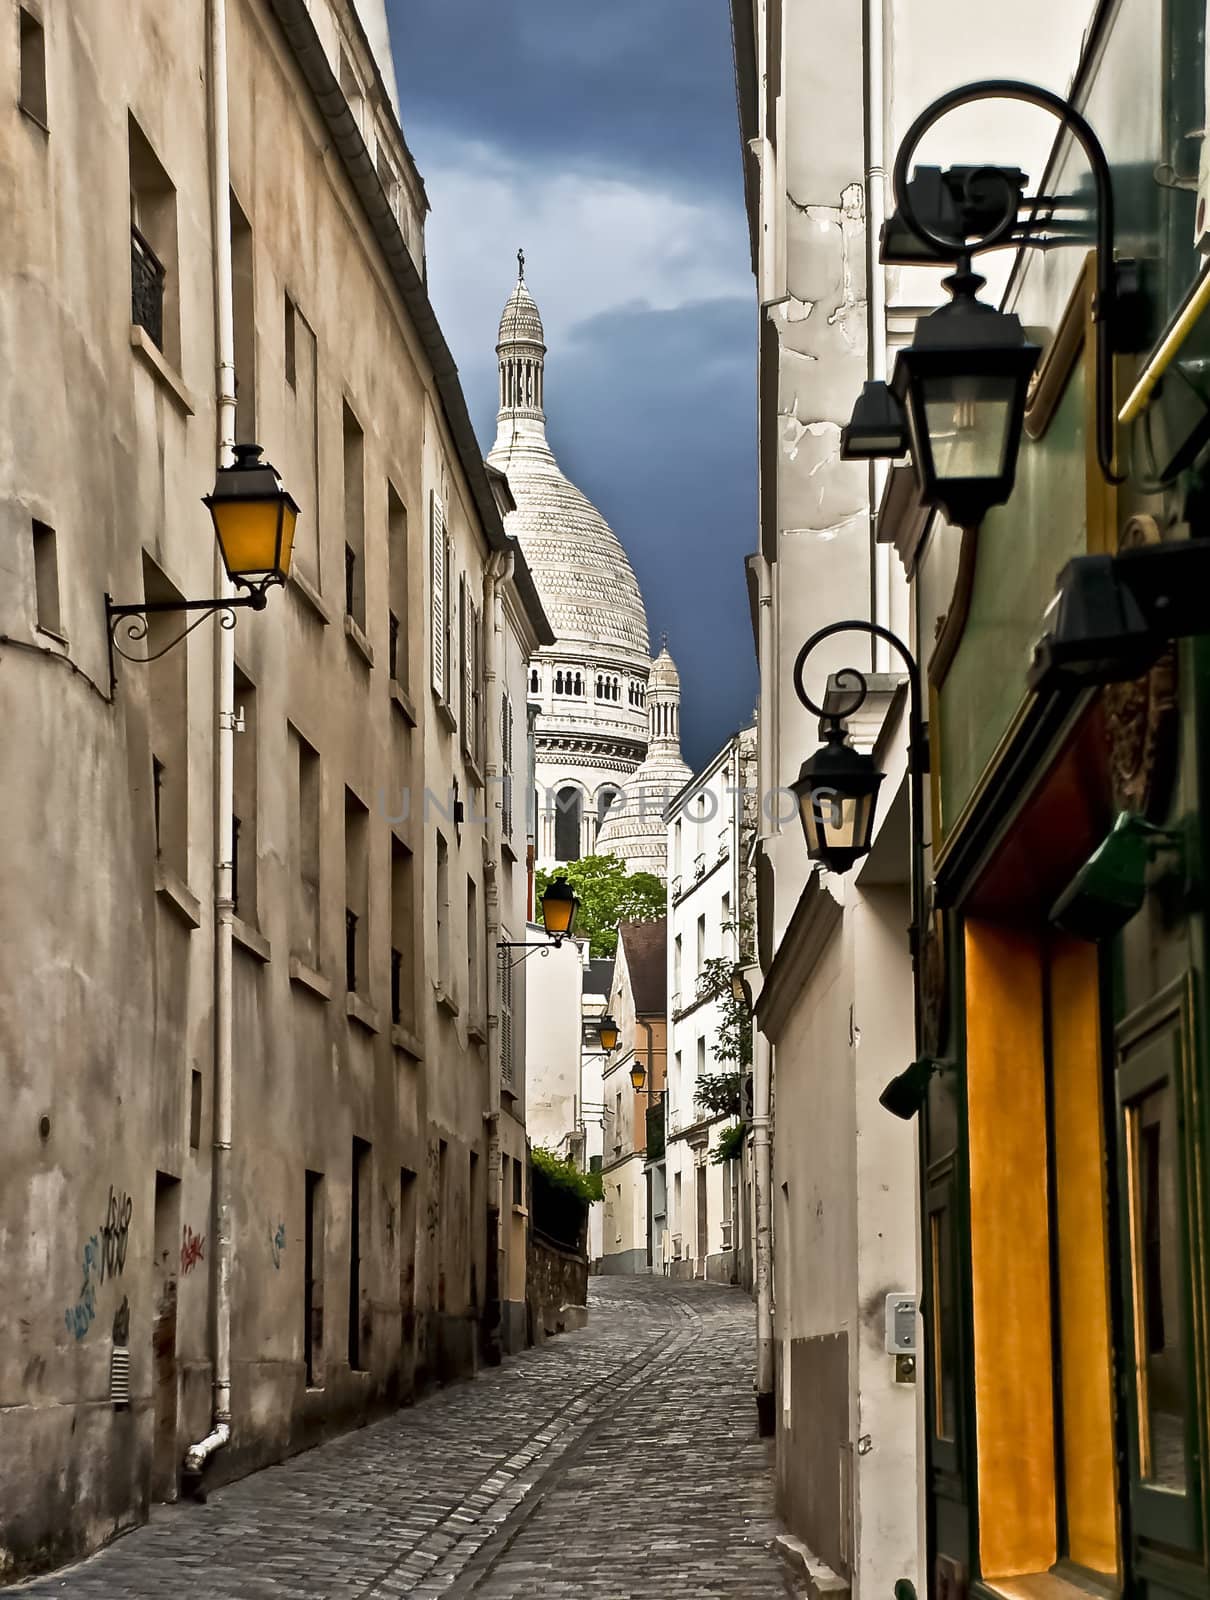 The shot was taken on a narrow street near a district of Monmartre, Paris, France